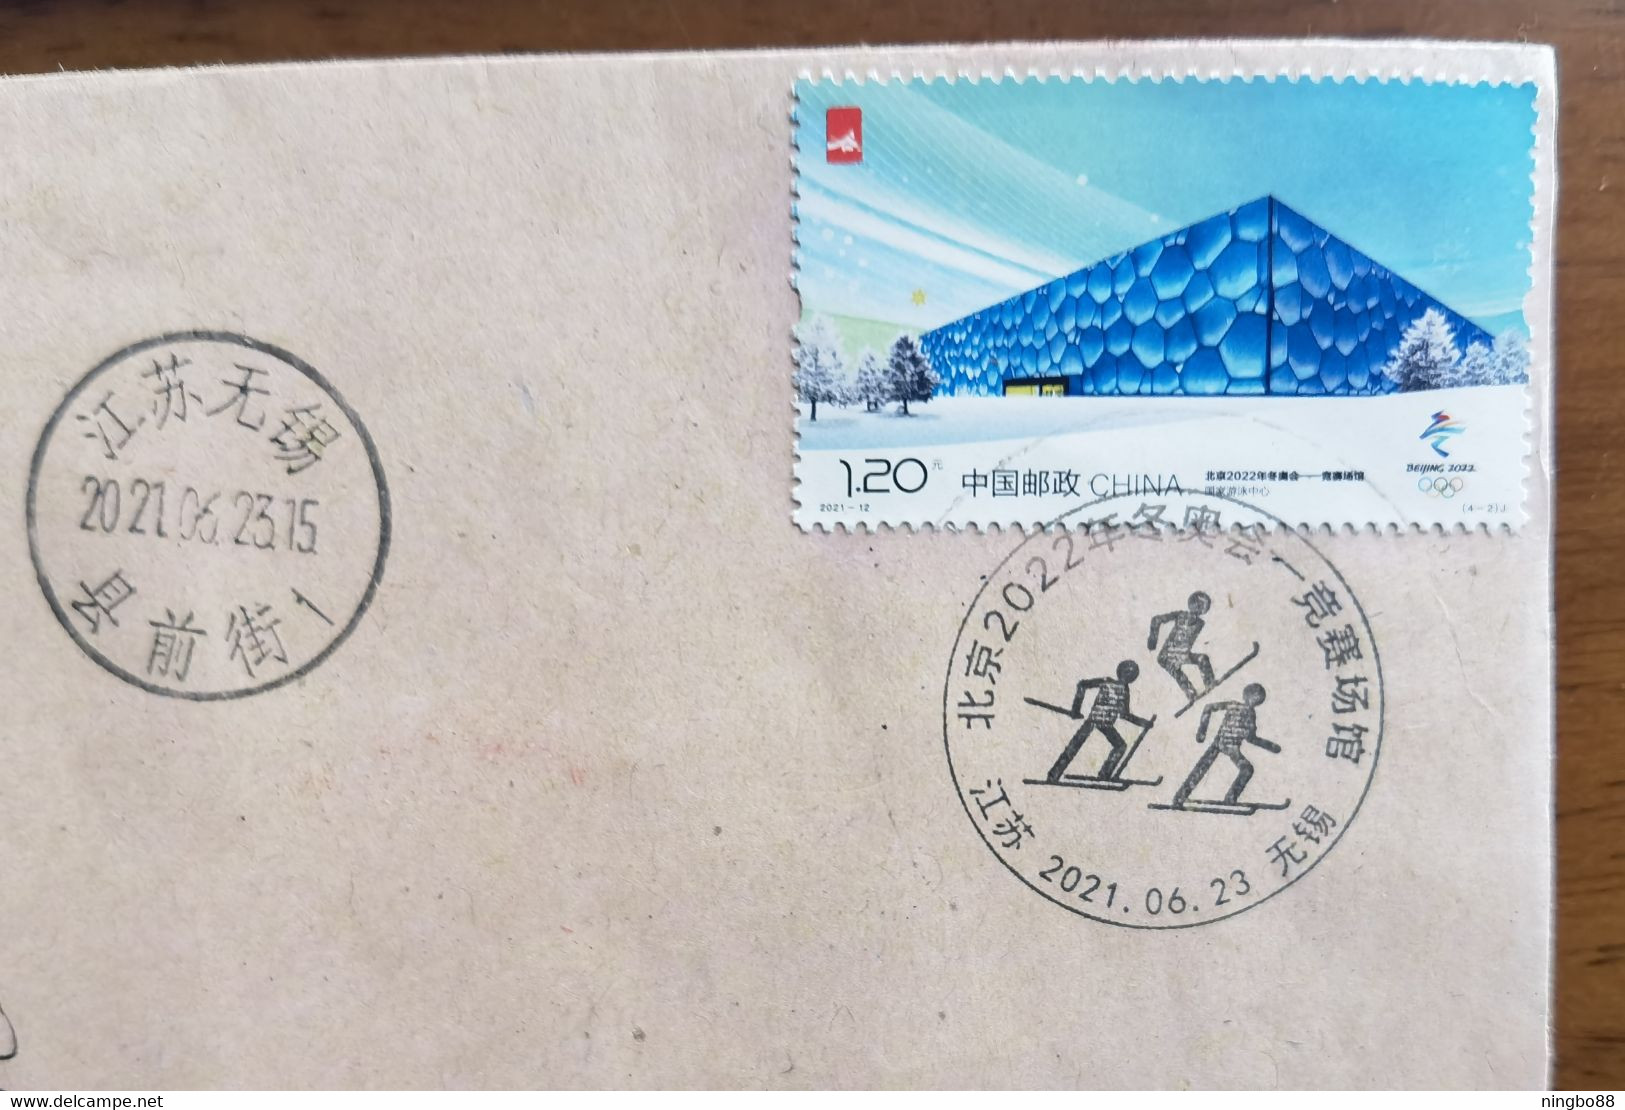 Skiing Sports,CN 21 Wuxi Post Beijing 2022 Winter Olympic Games Competition Venues Stamp Commemorative PMK 1st Day Used - Invierno 2022 : Pekín